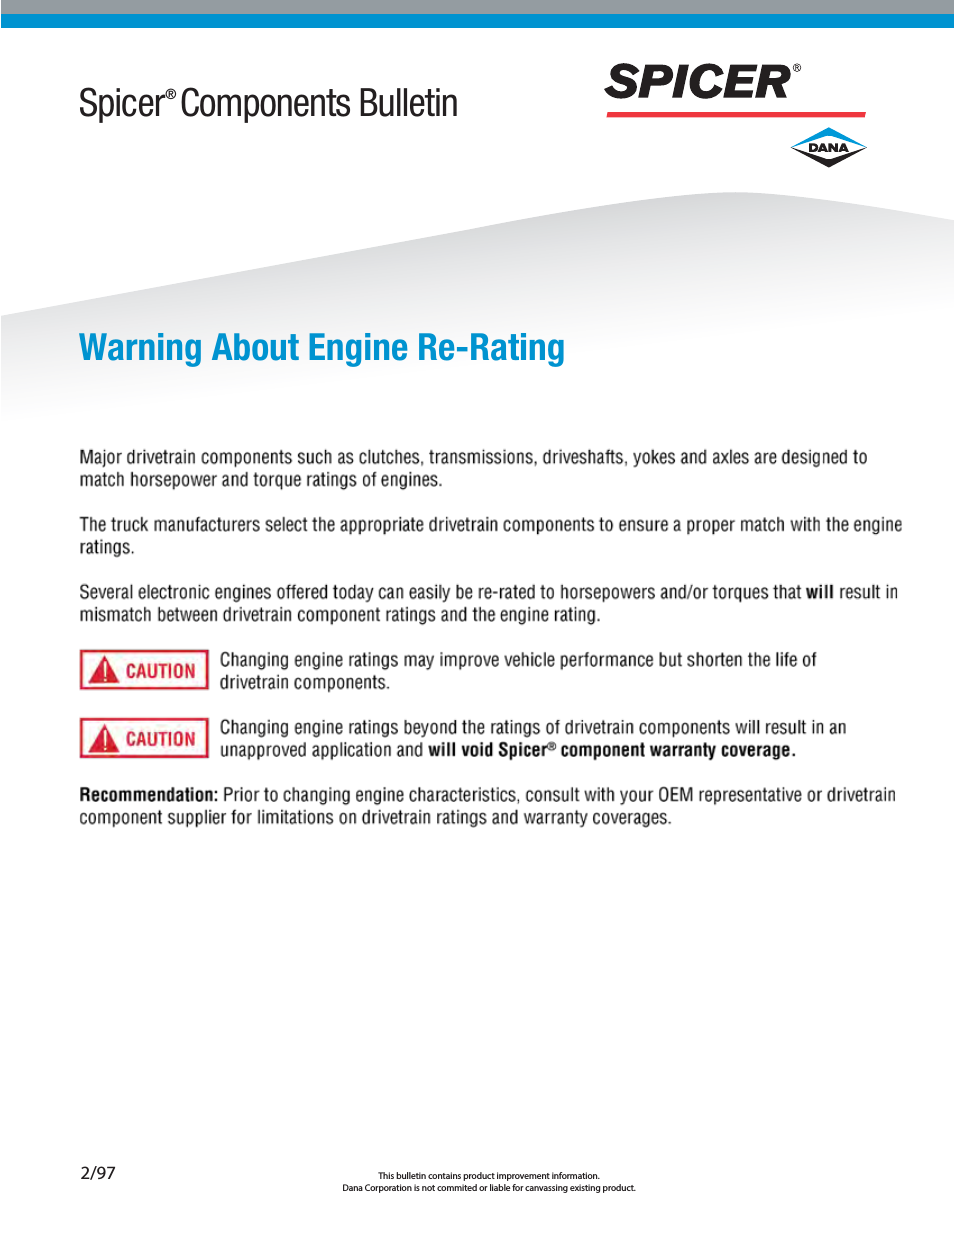 Warning About Engine Re-Rating